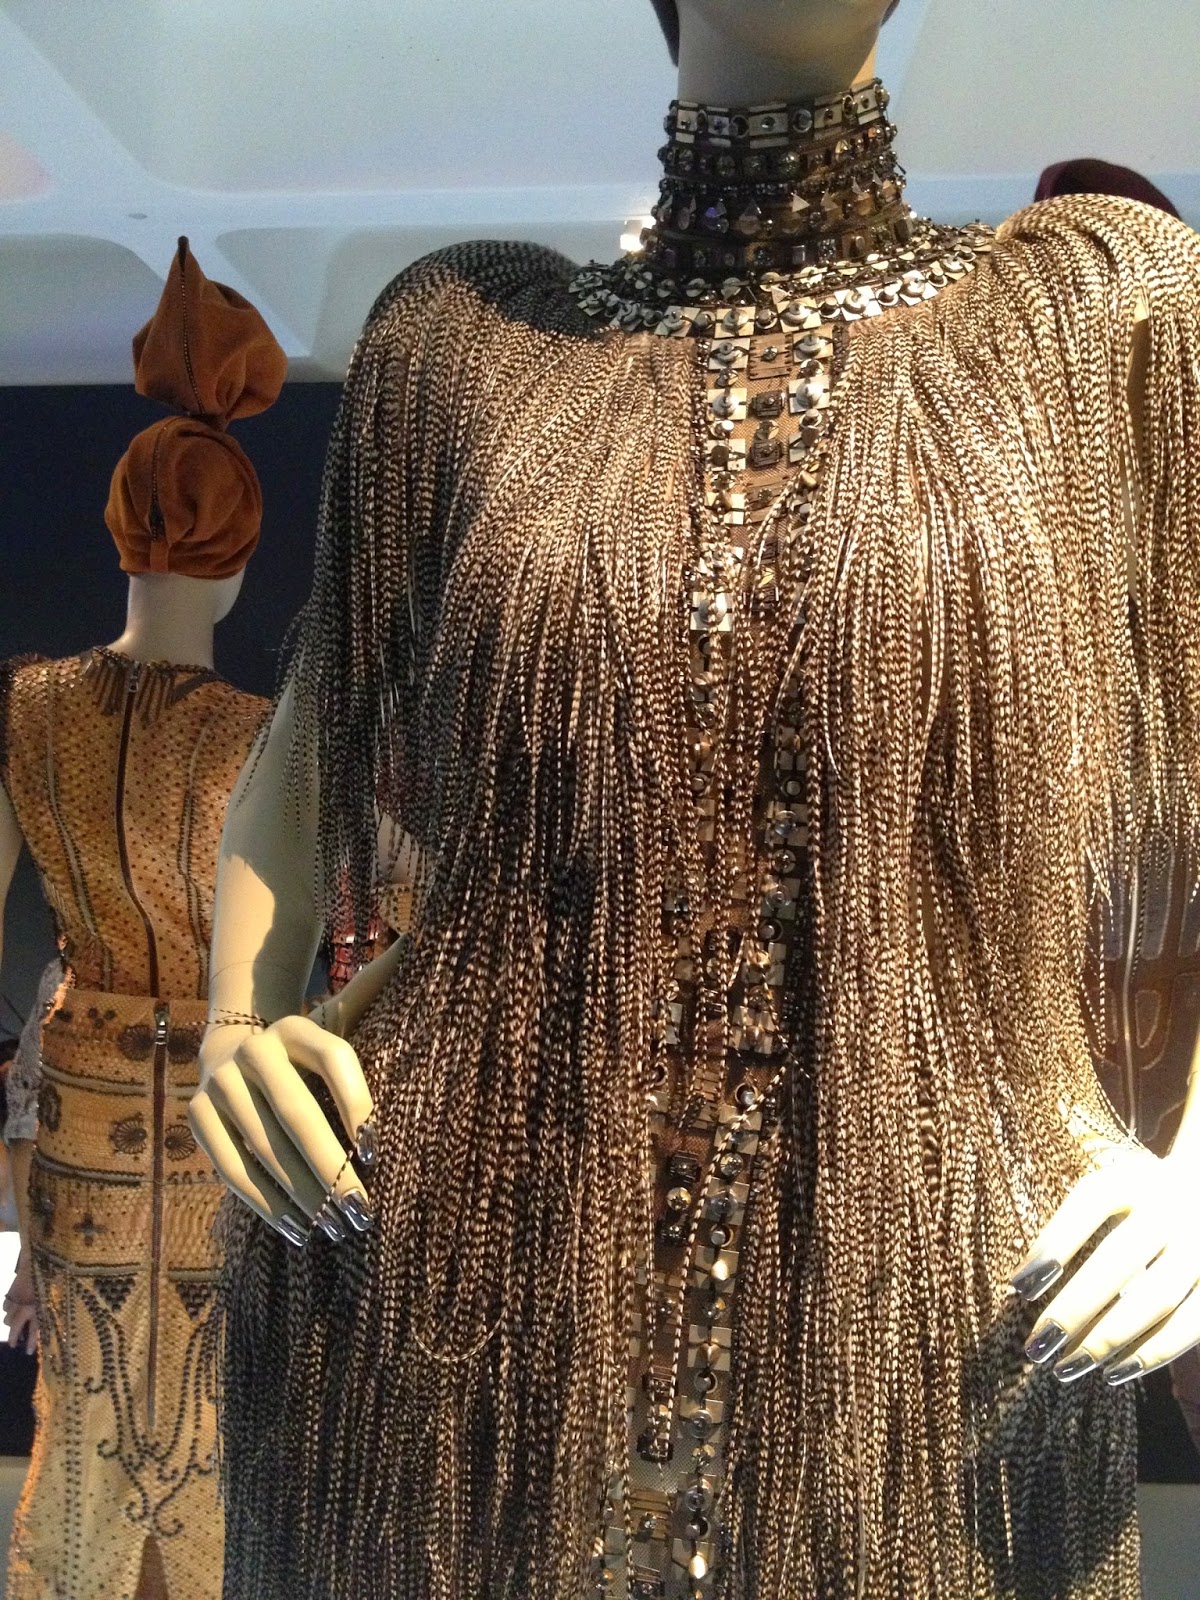 Jean Paul Gaultier at the Barbican | Fitzroy Boutique